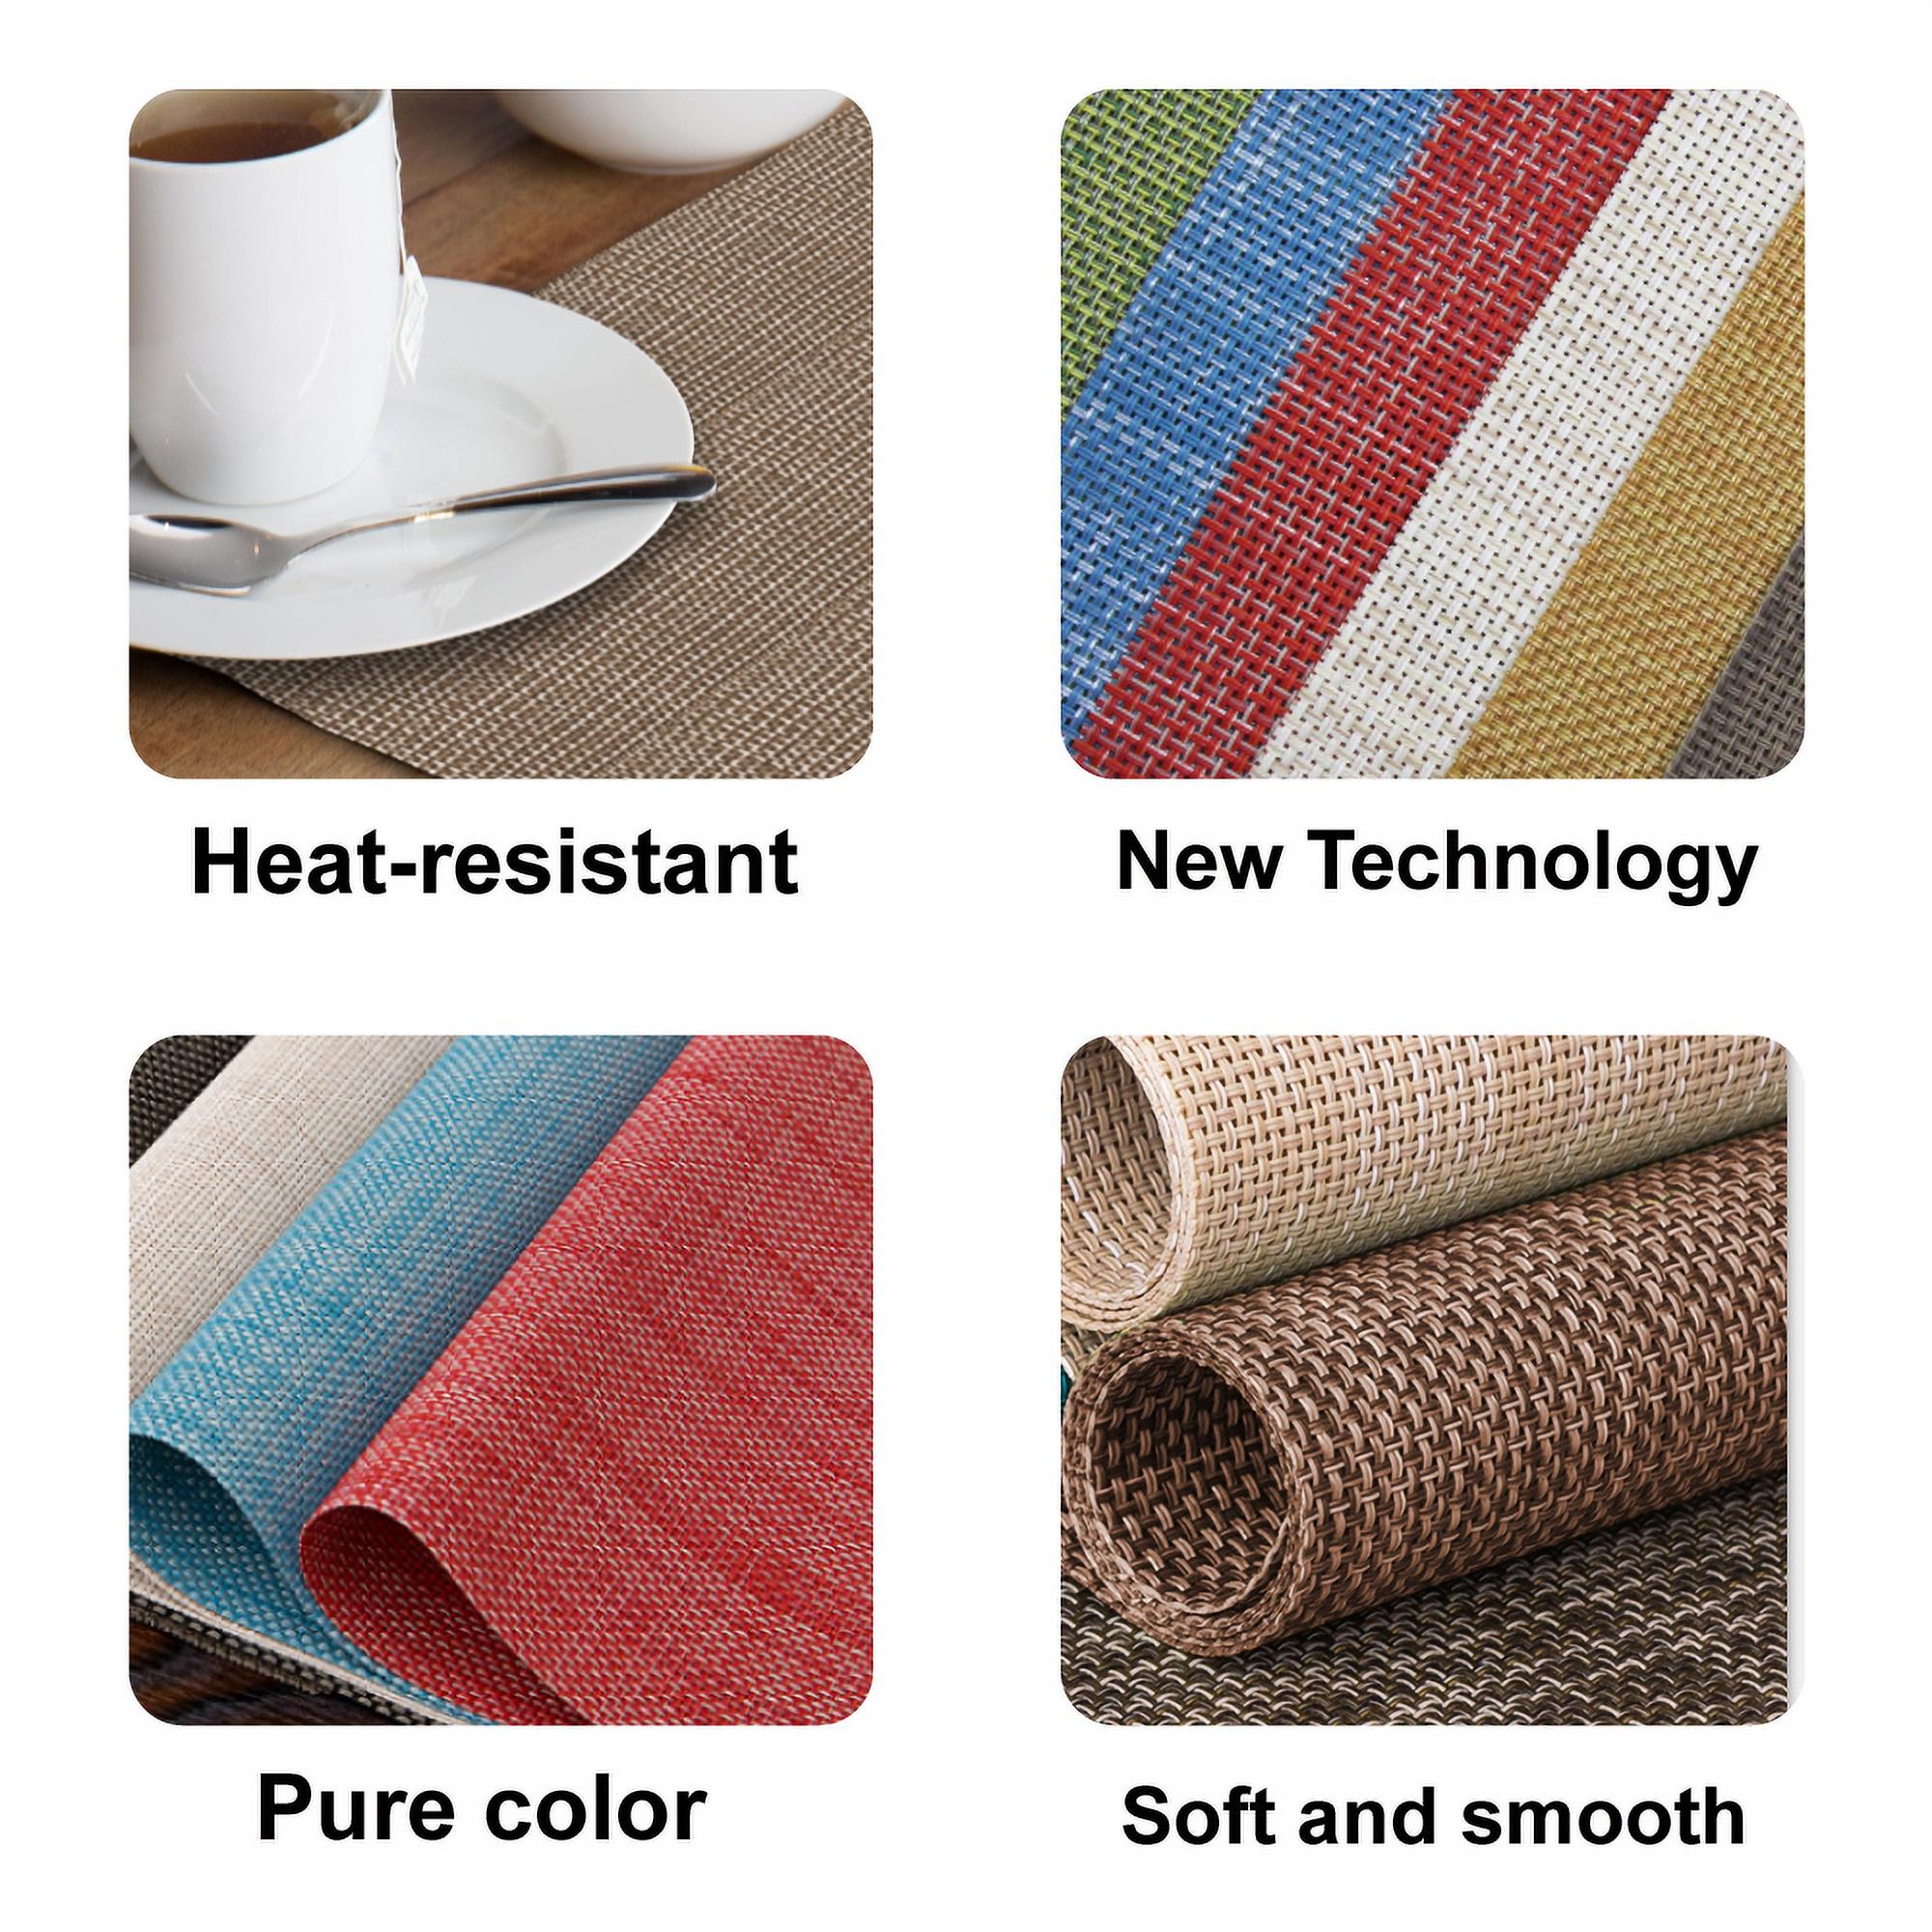 Howarmer Woven Placemats for Dining Table, Wipe Clean Vinyl Placemats Table Pad, Heat Resistant Anti-Slip Table Mats for Dining Room Kitchen Table Decor, PVC Placemats Set of 4, Brown - image 5 of 7